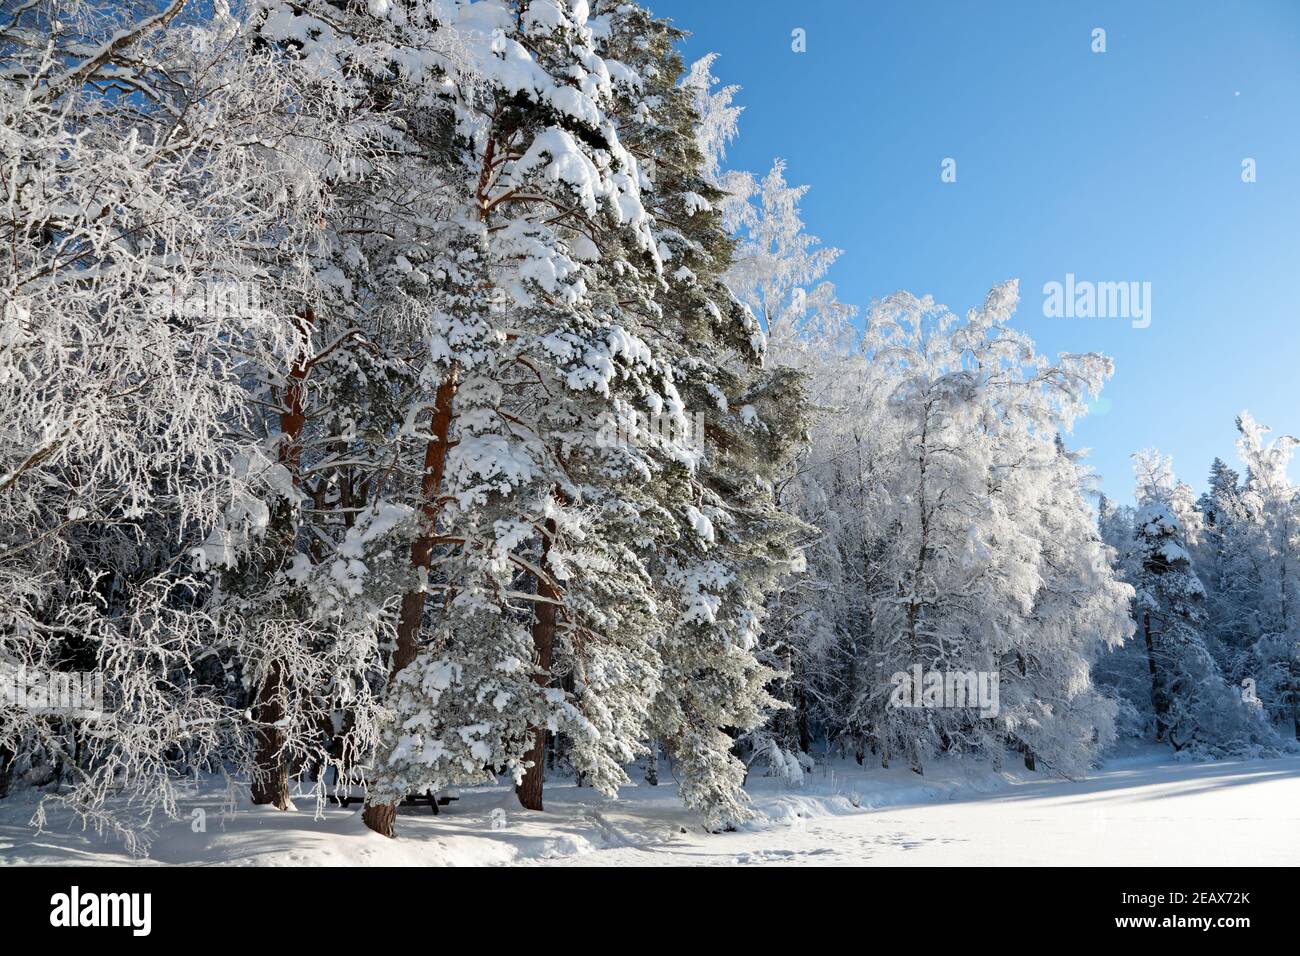 A beautiful wintry landscape with snowy tall spruce and birch trees with falling frost flakes Stock Photo